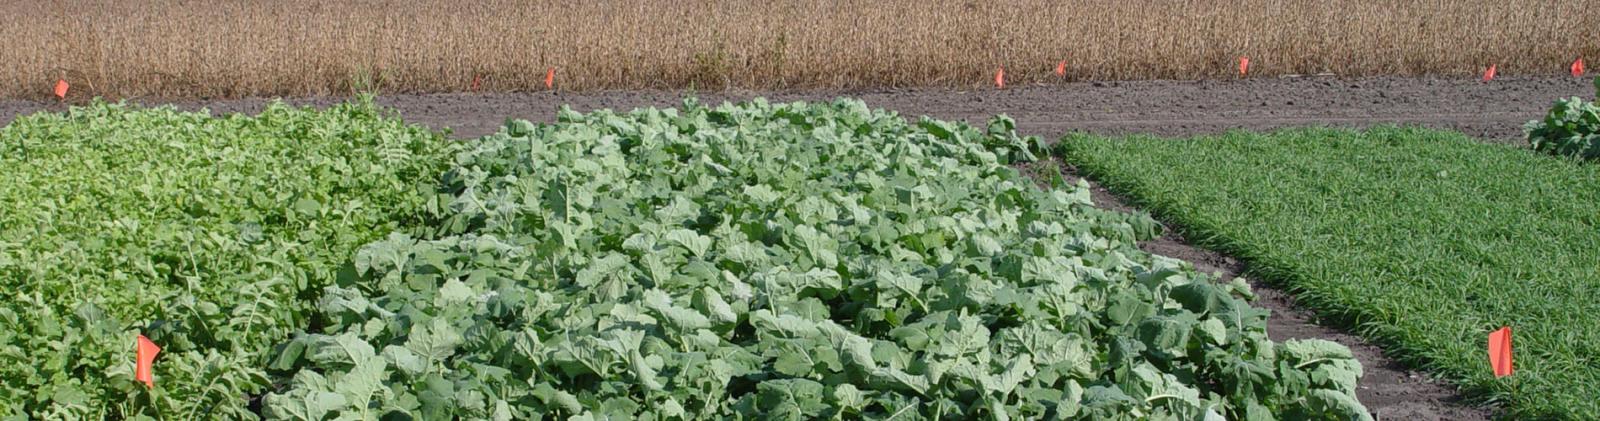 Wortman Research Cover Crops